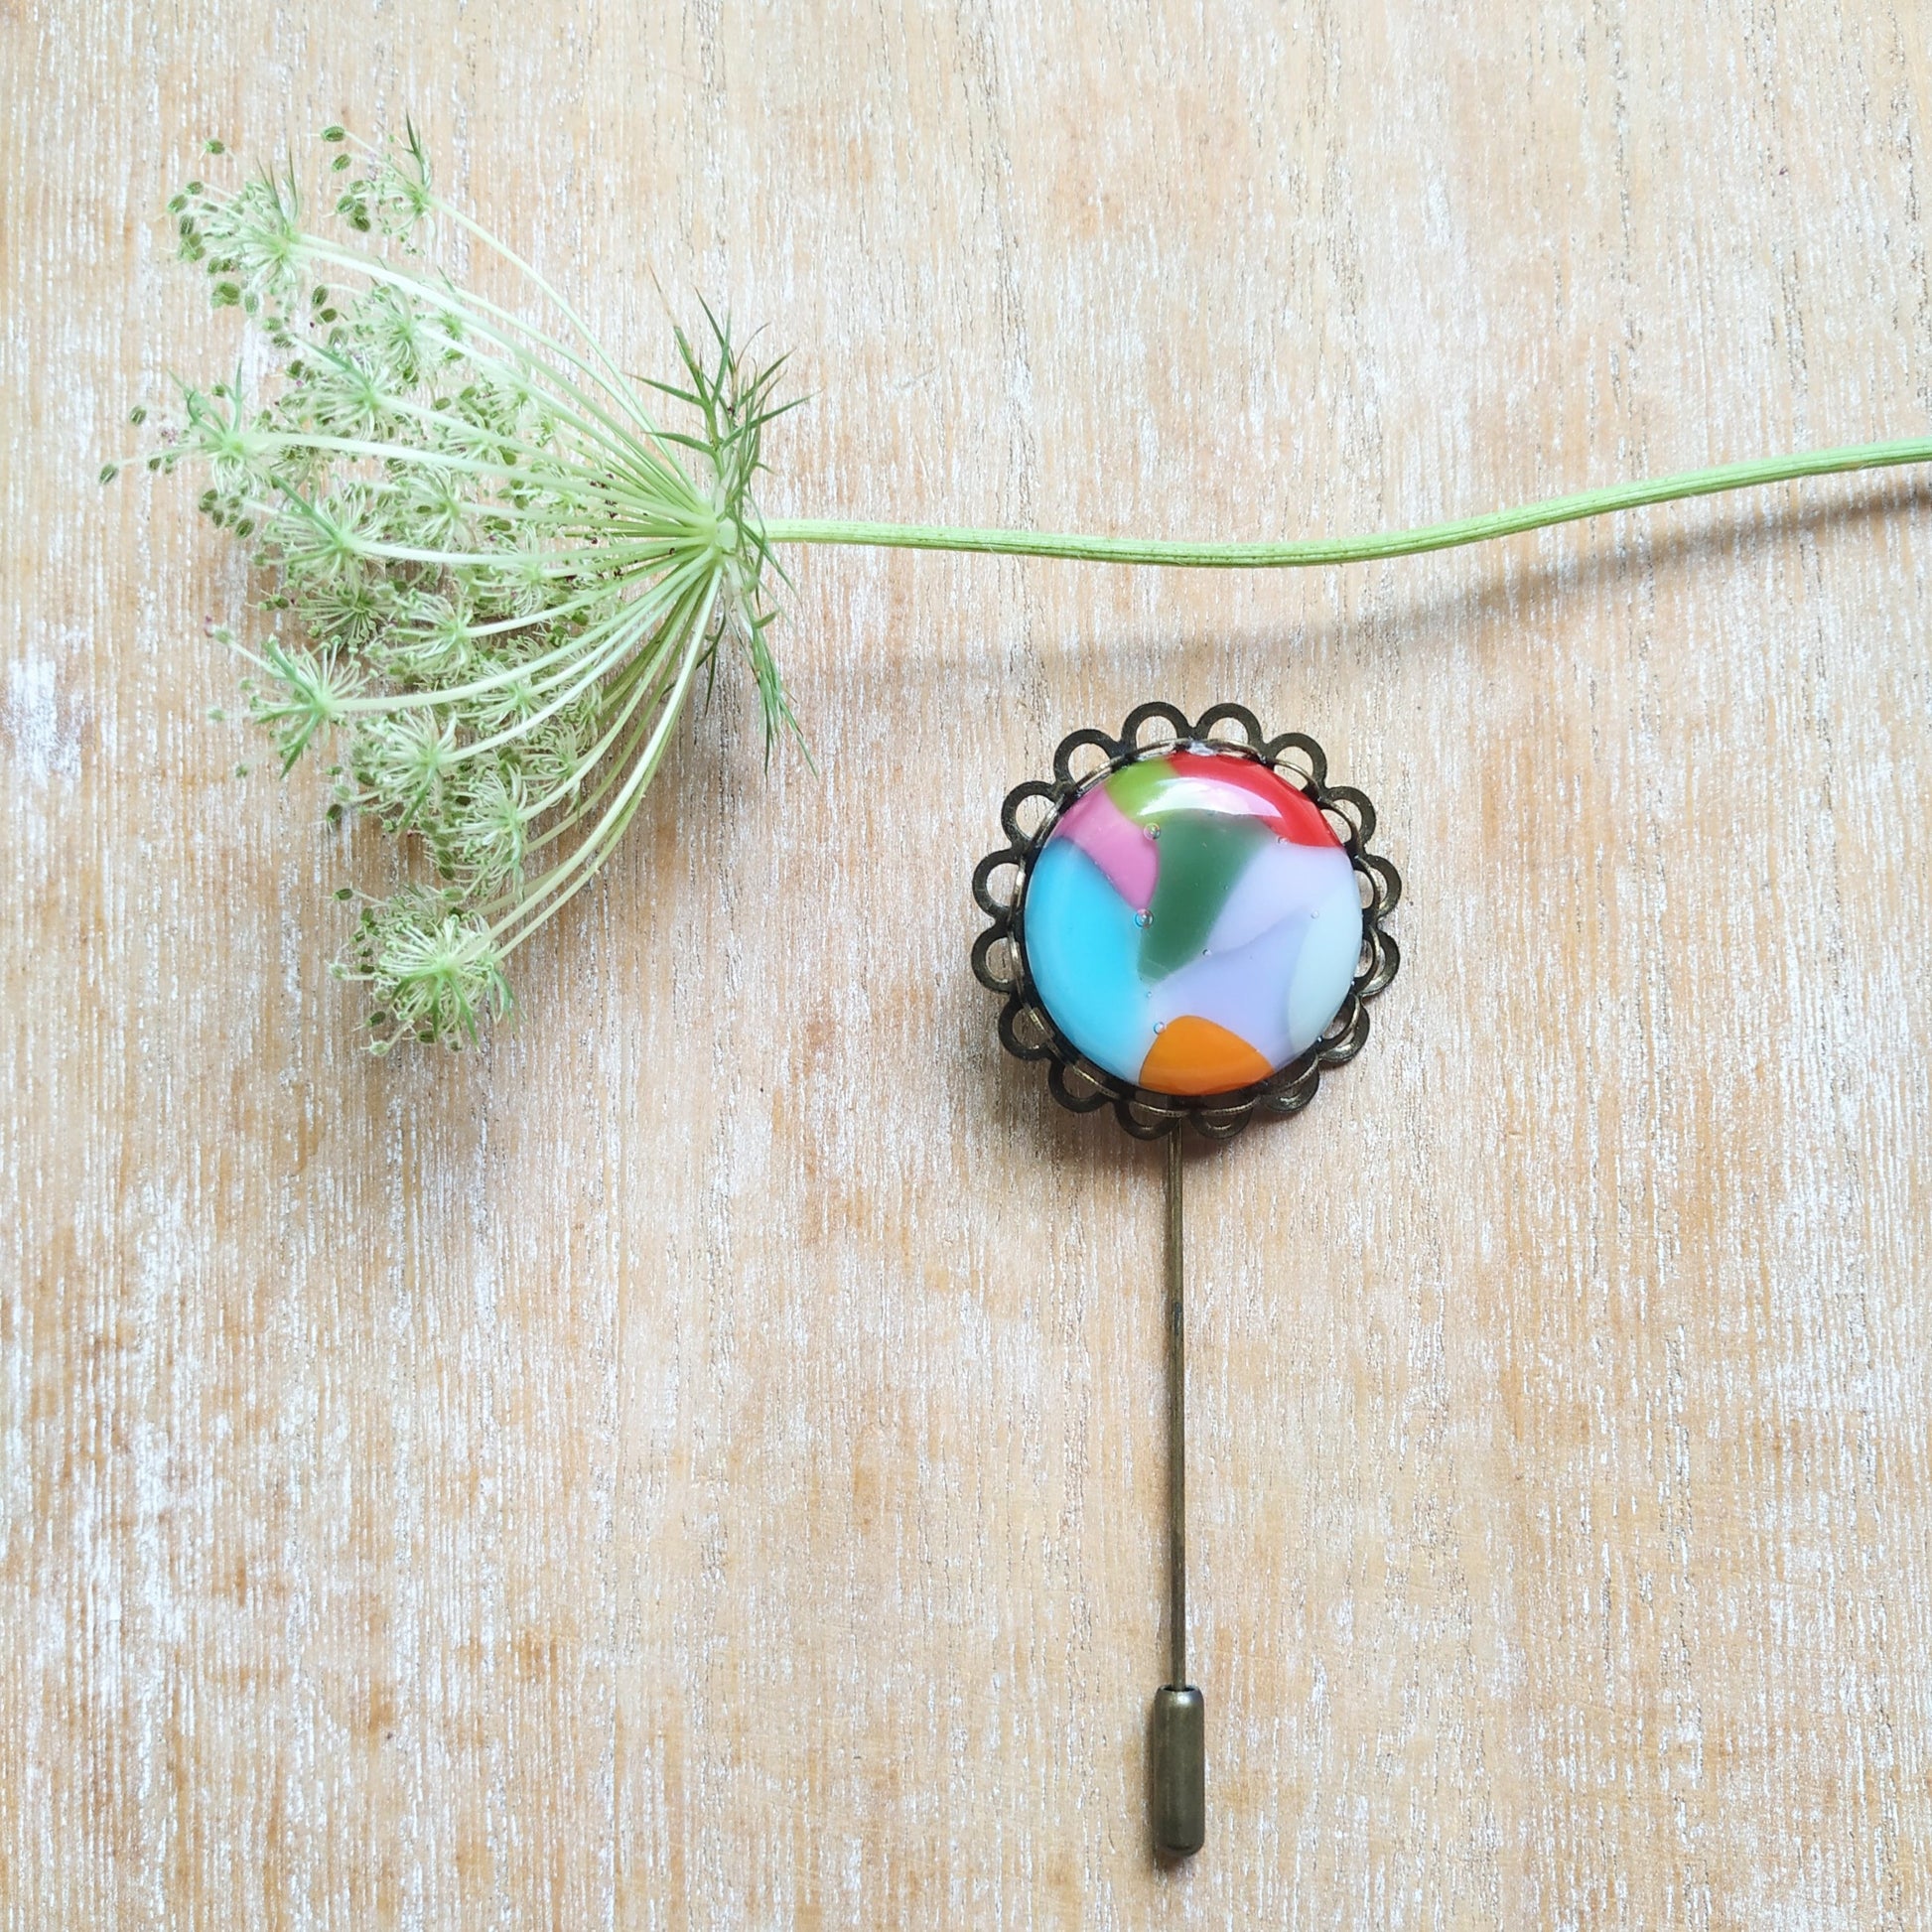 Colorful brooch and  wild flower on table. Handmade by Pamela Angus 